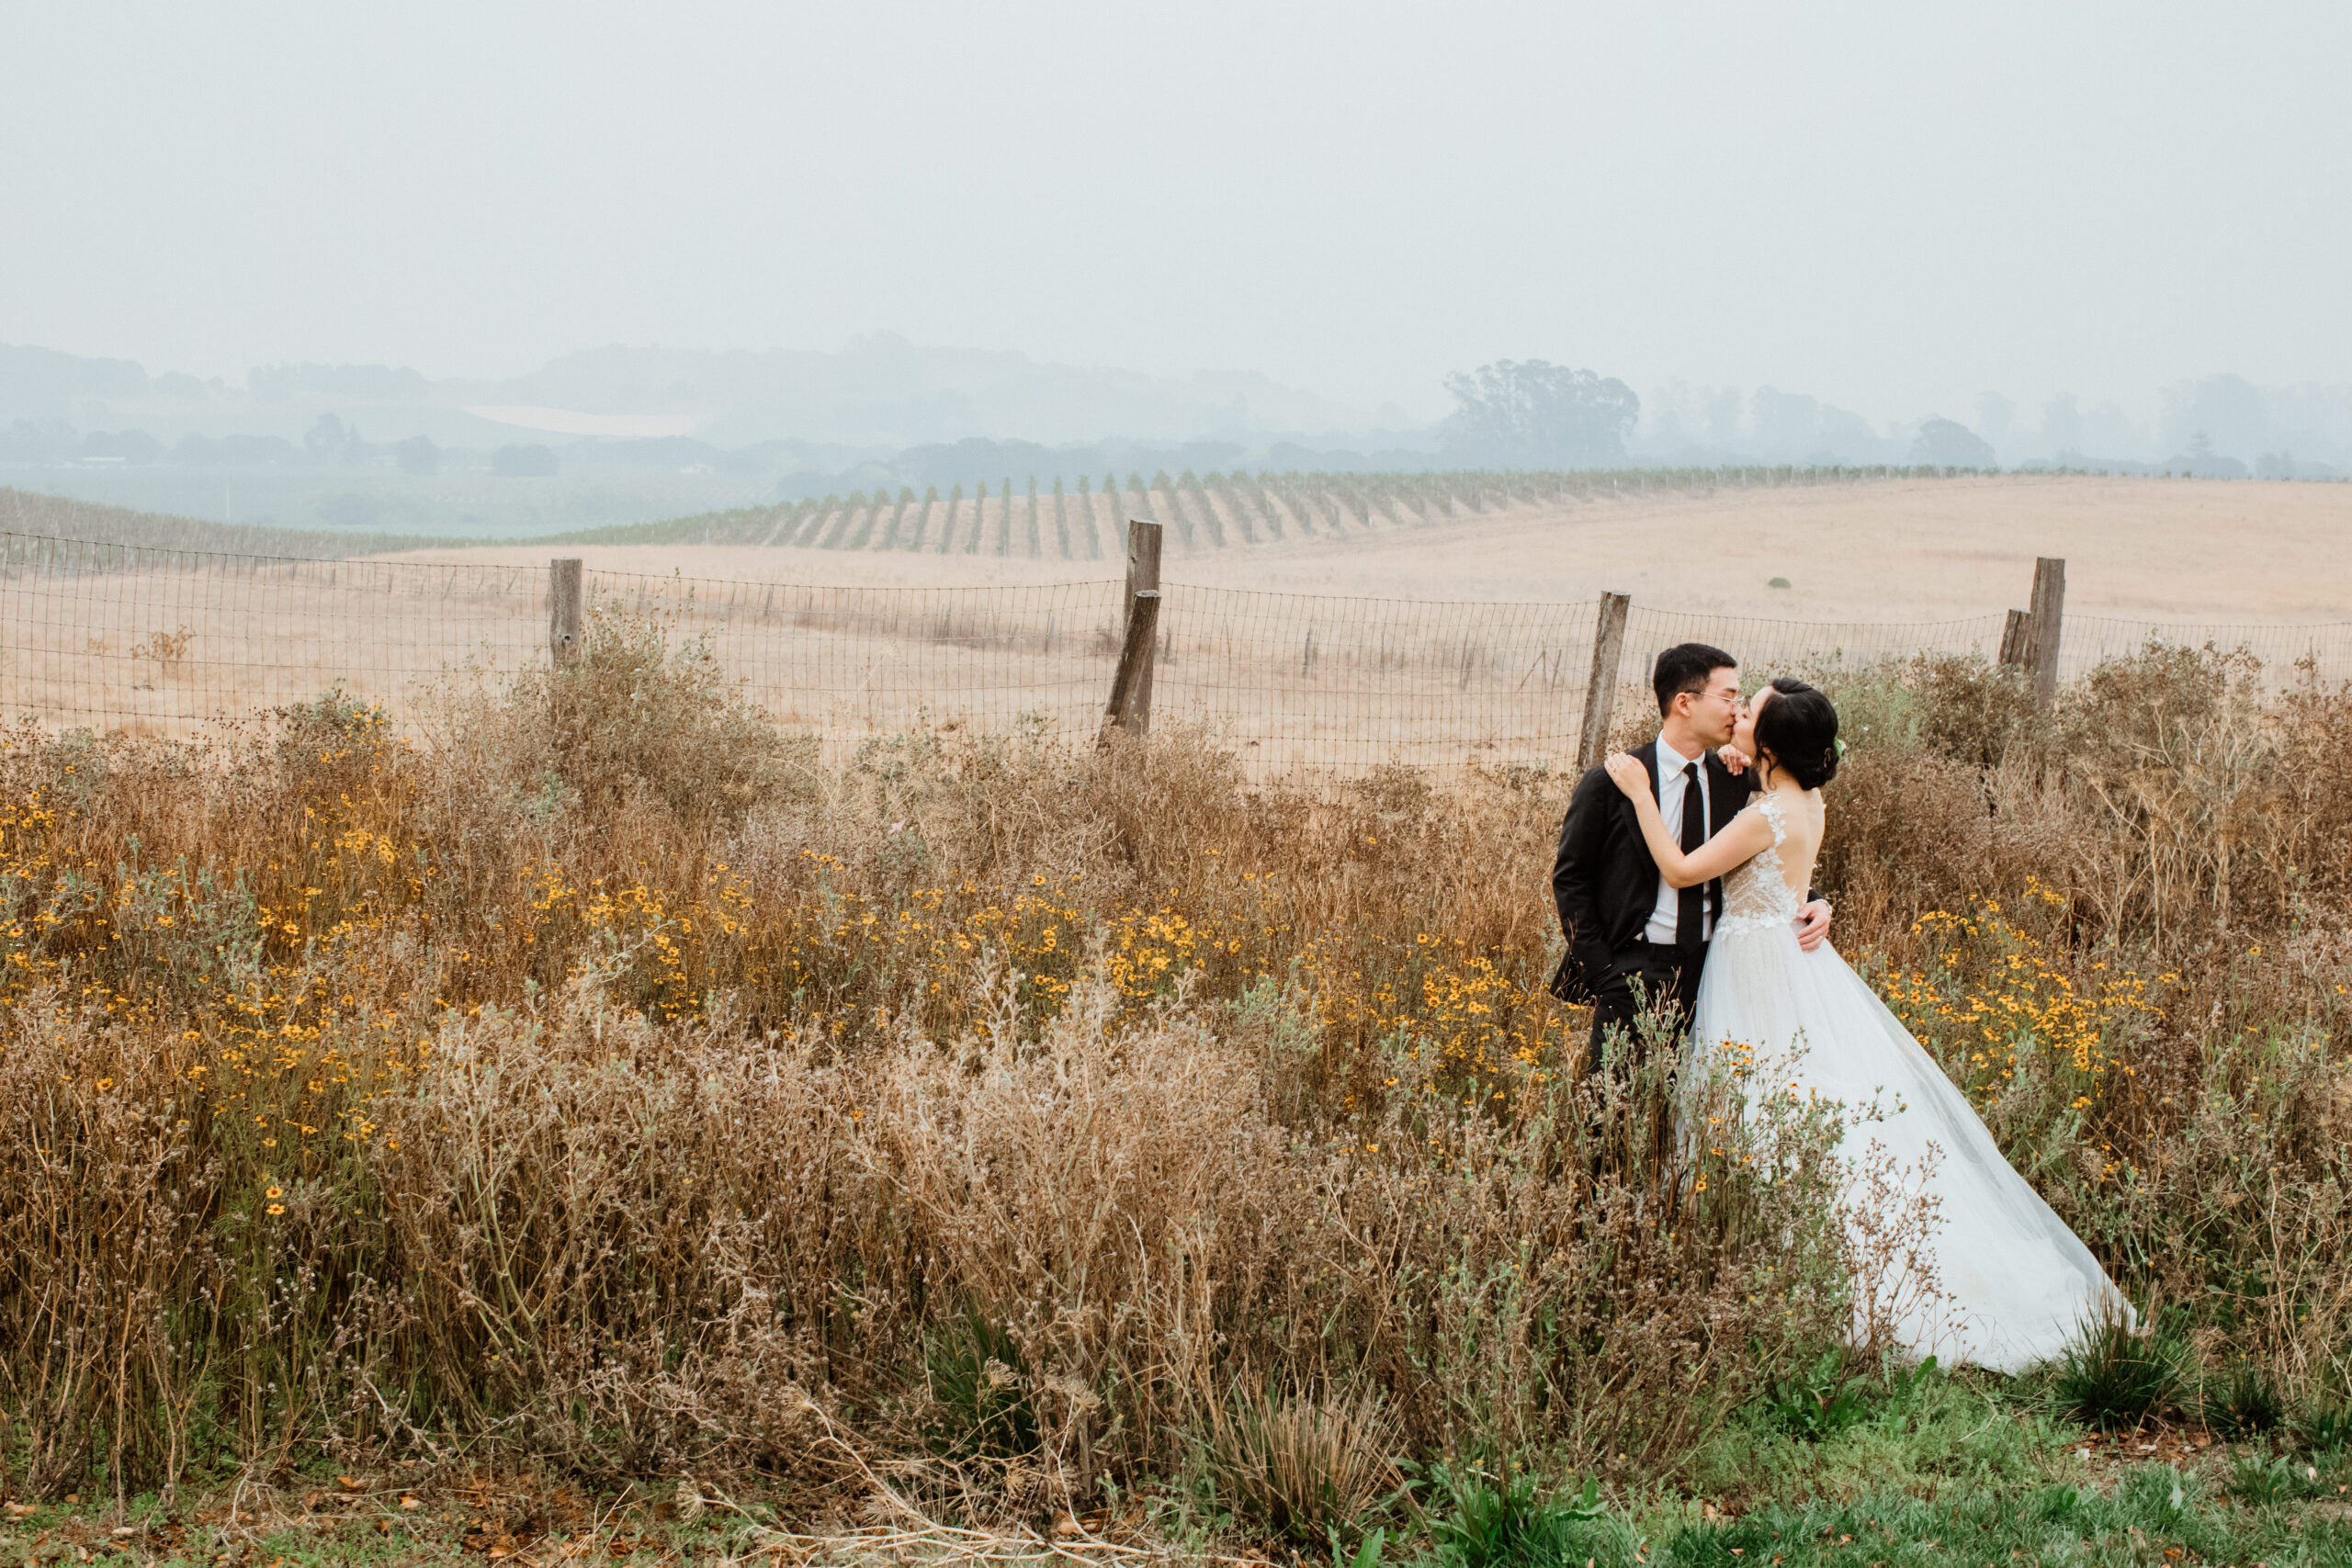 Beautiful bride and groom share a romantic moment overlooking the rows at their Napa valley vineyard wedding venue